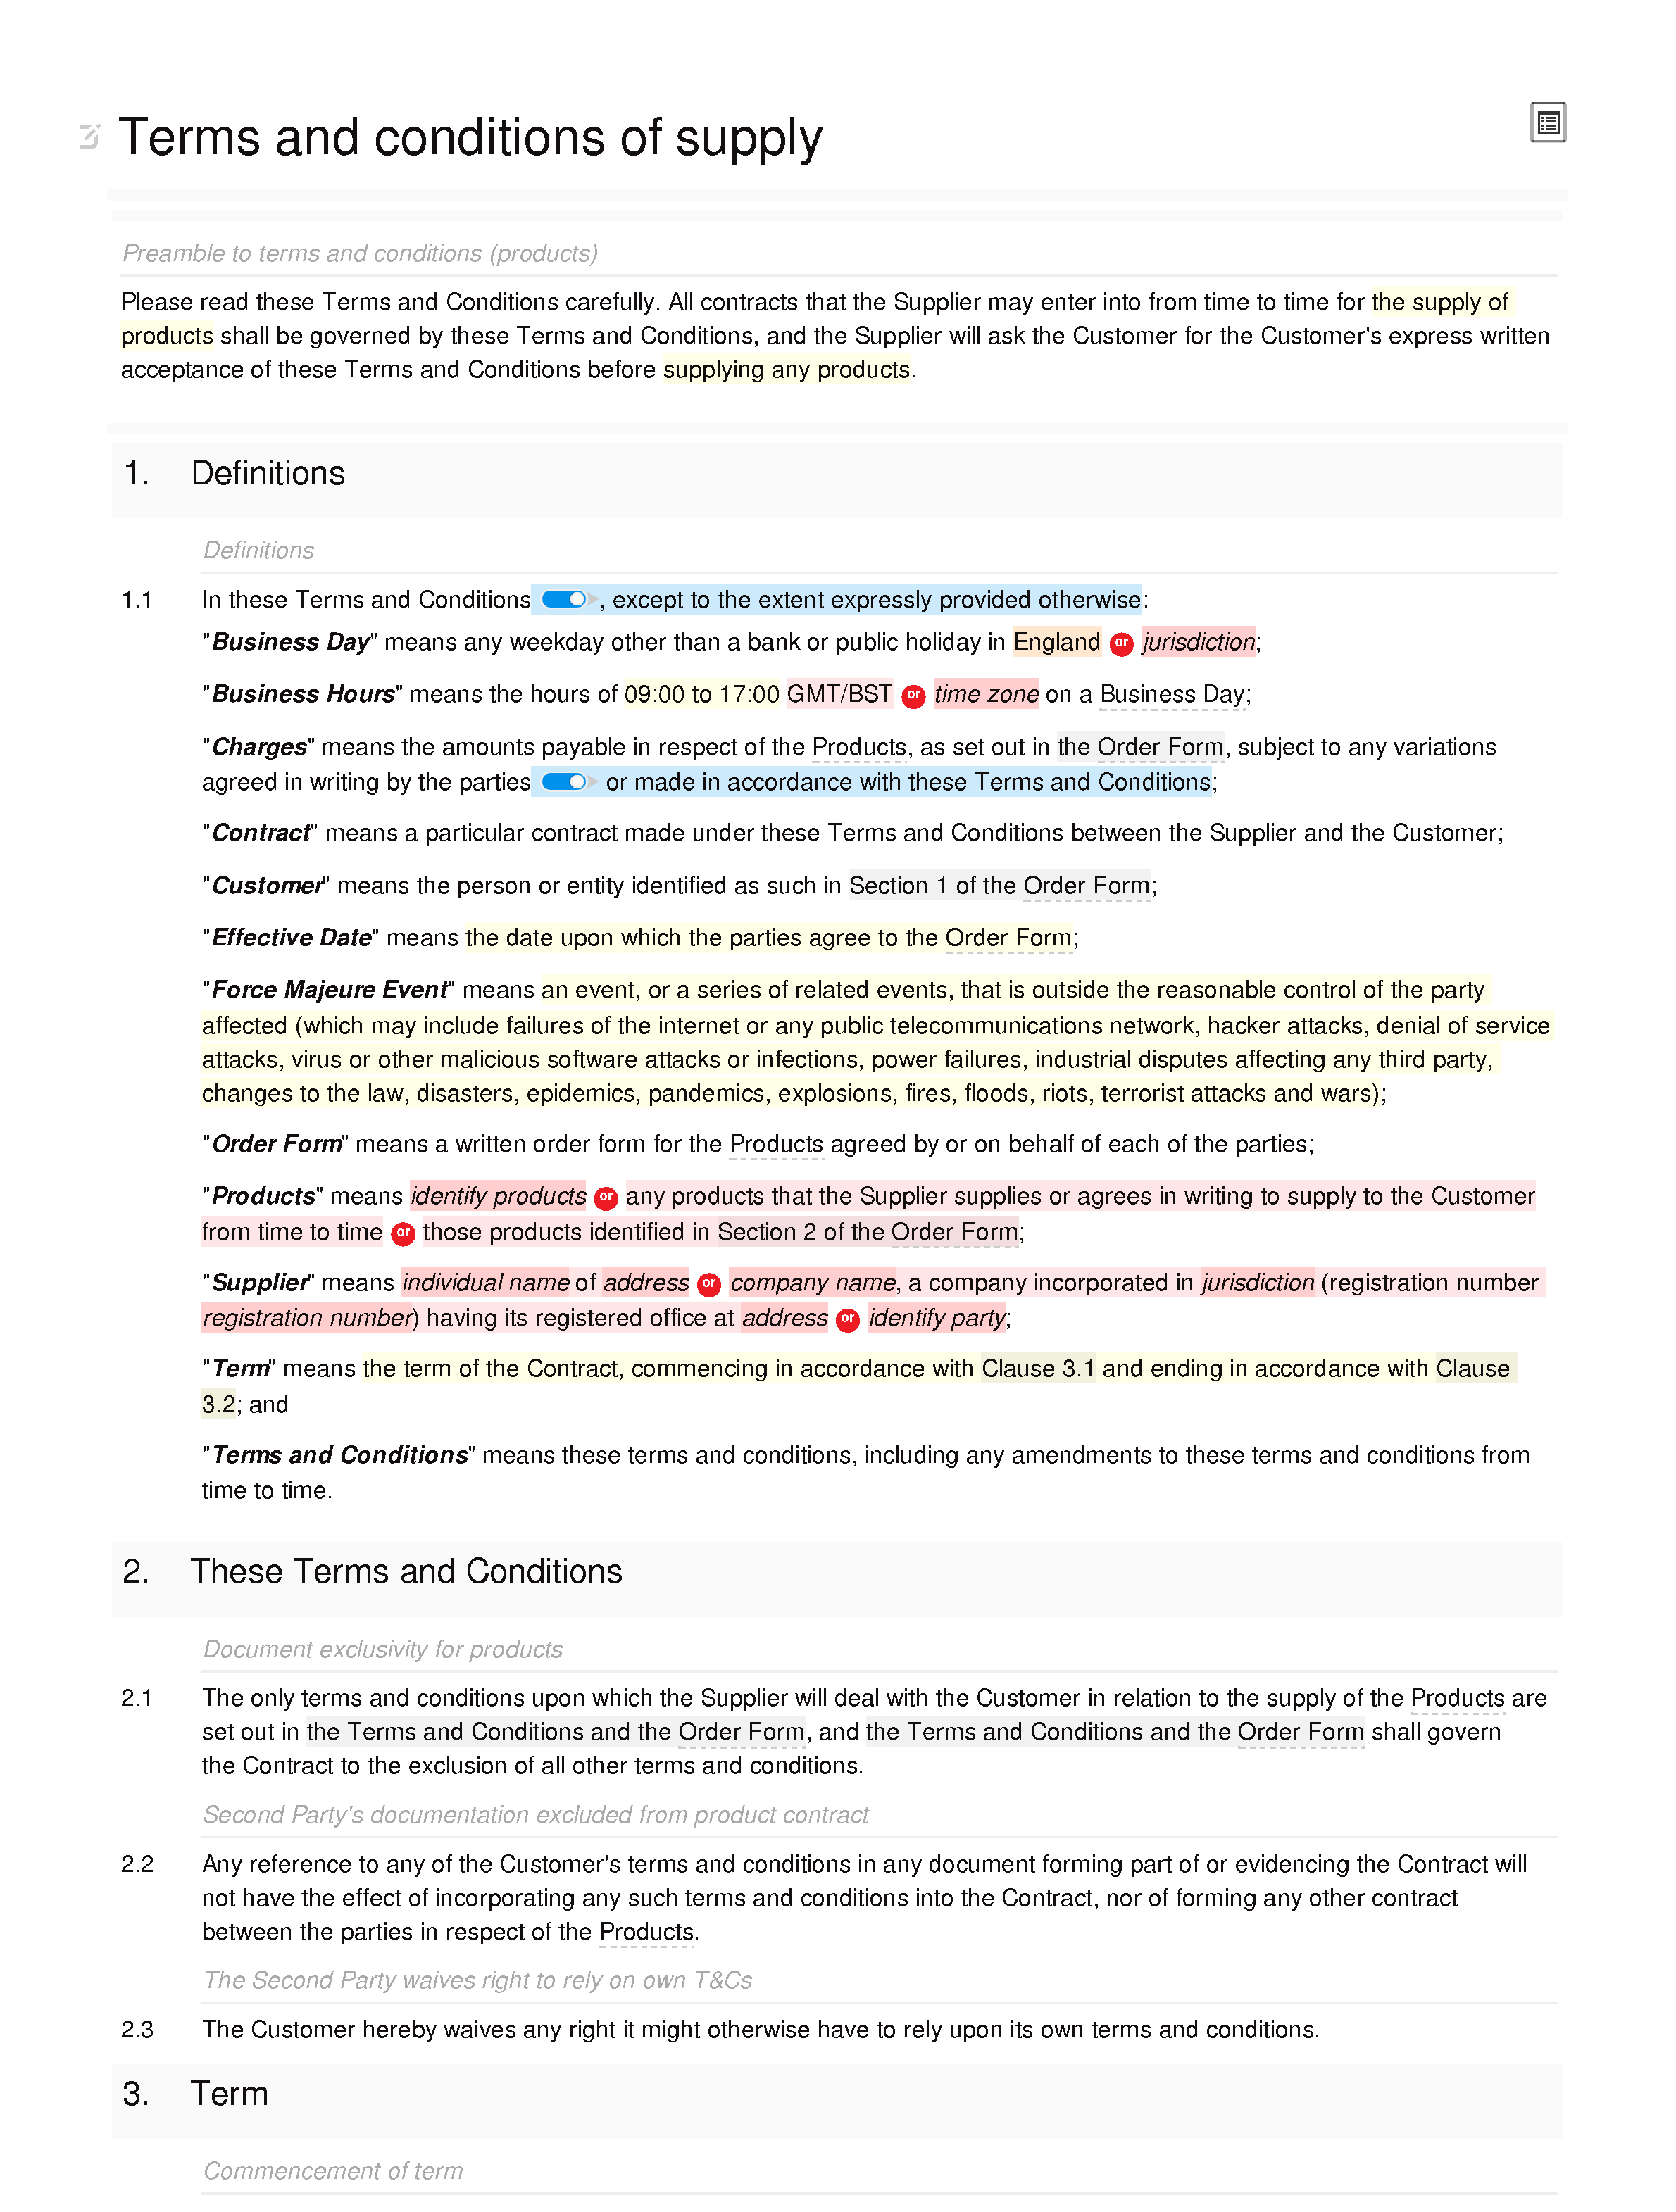 Terms and conditions of supply (standard) document editor preview